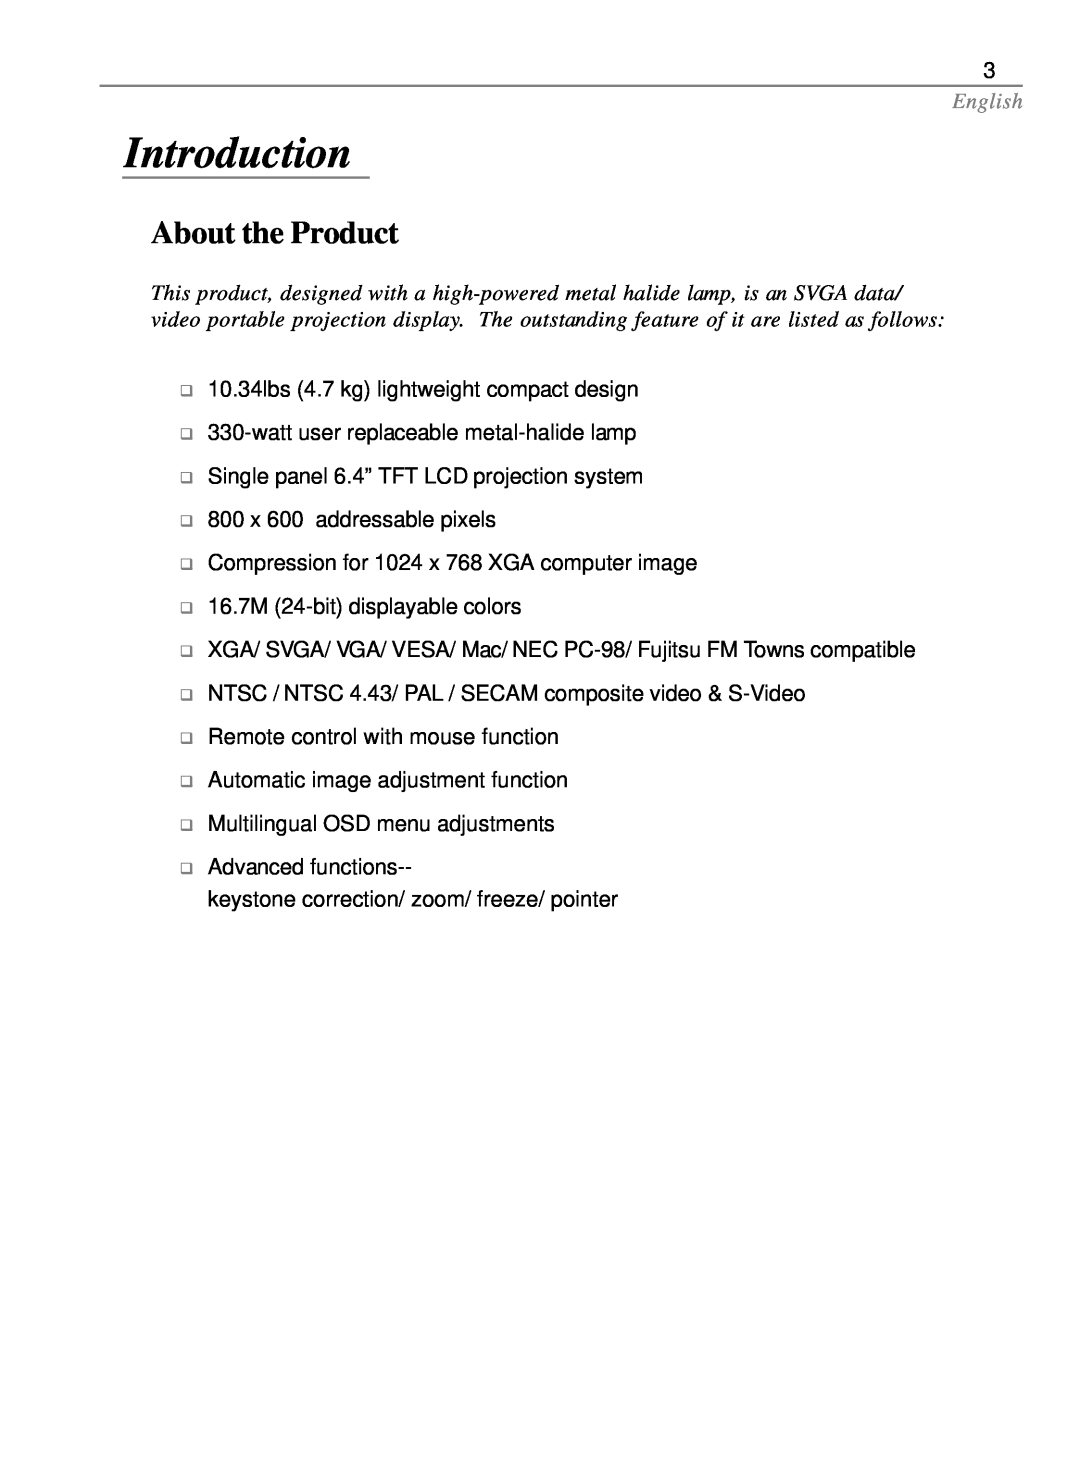 Optoma Technology EP585 specifications Introduction, About the Product, English 